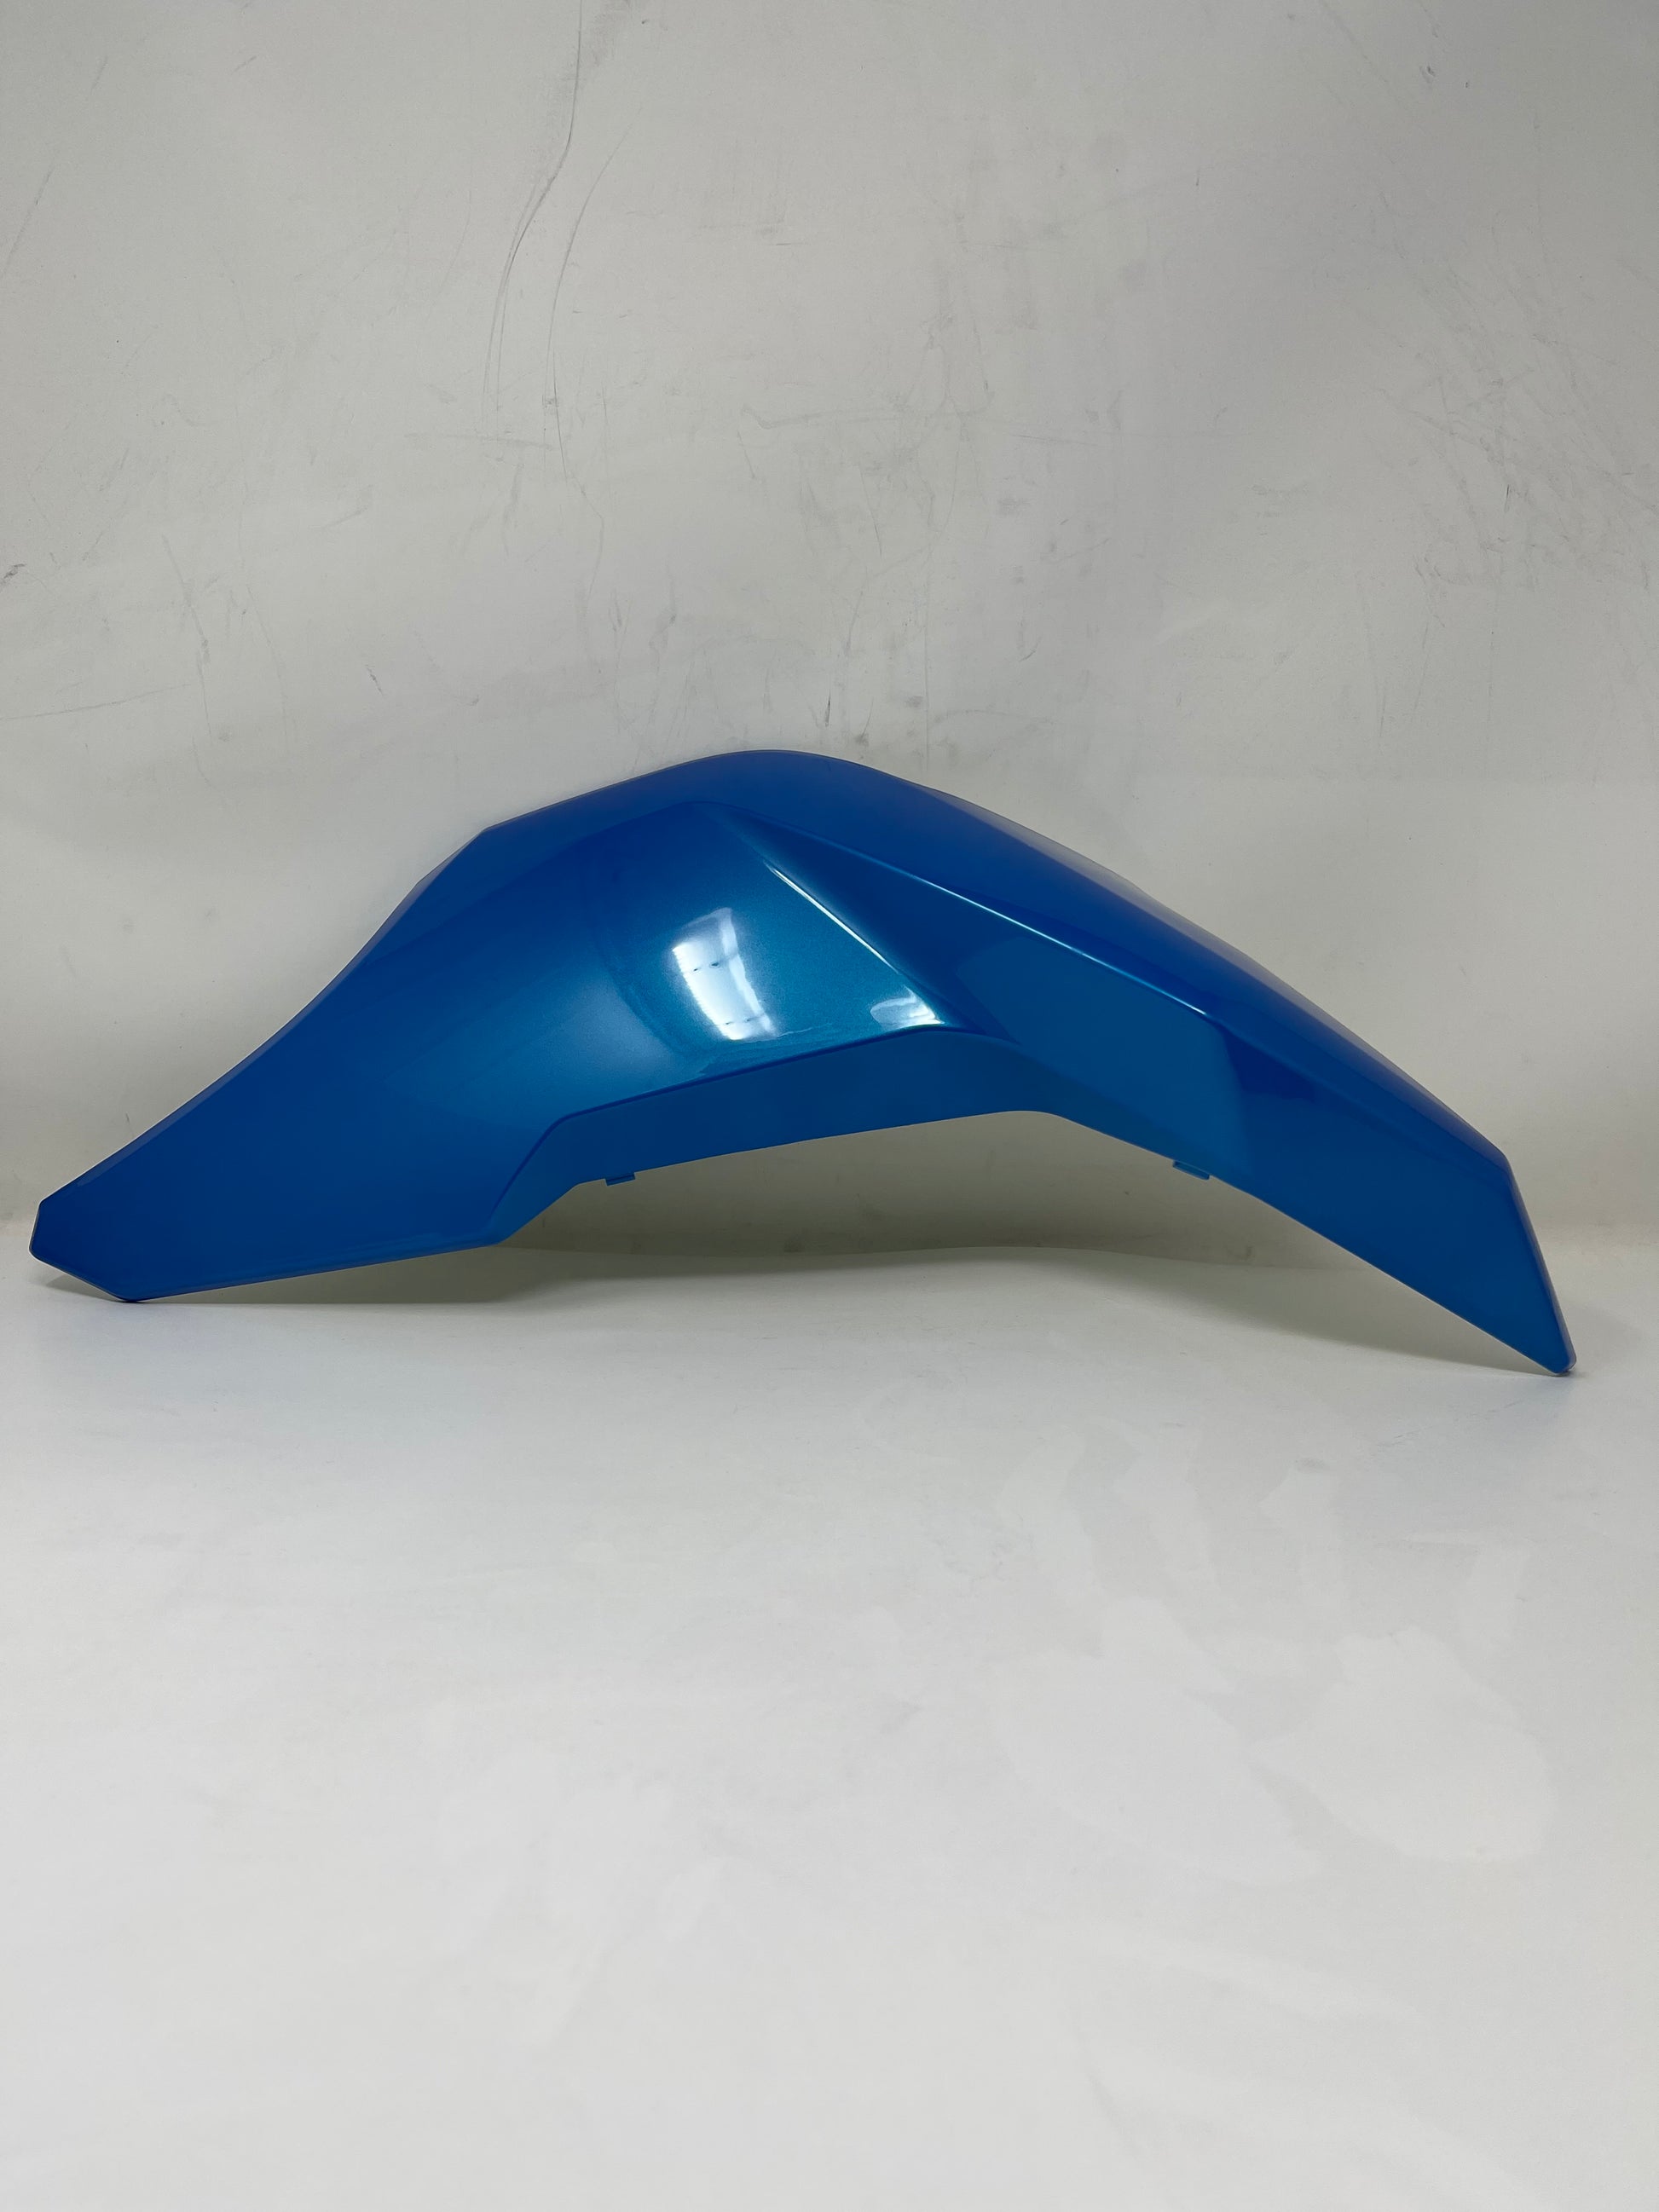 Right fuel tank cover for BD125-10 in blue. Part # 125010003